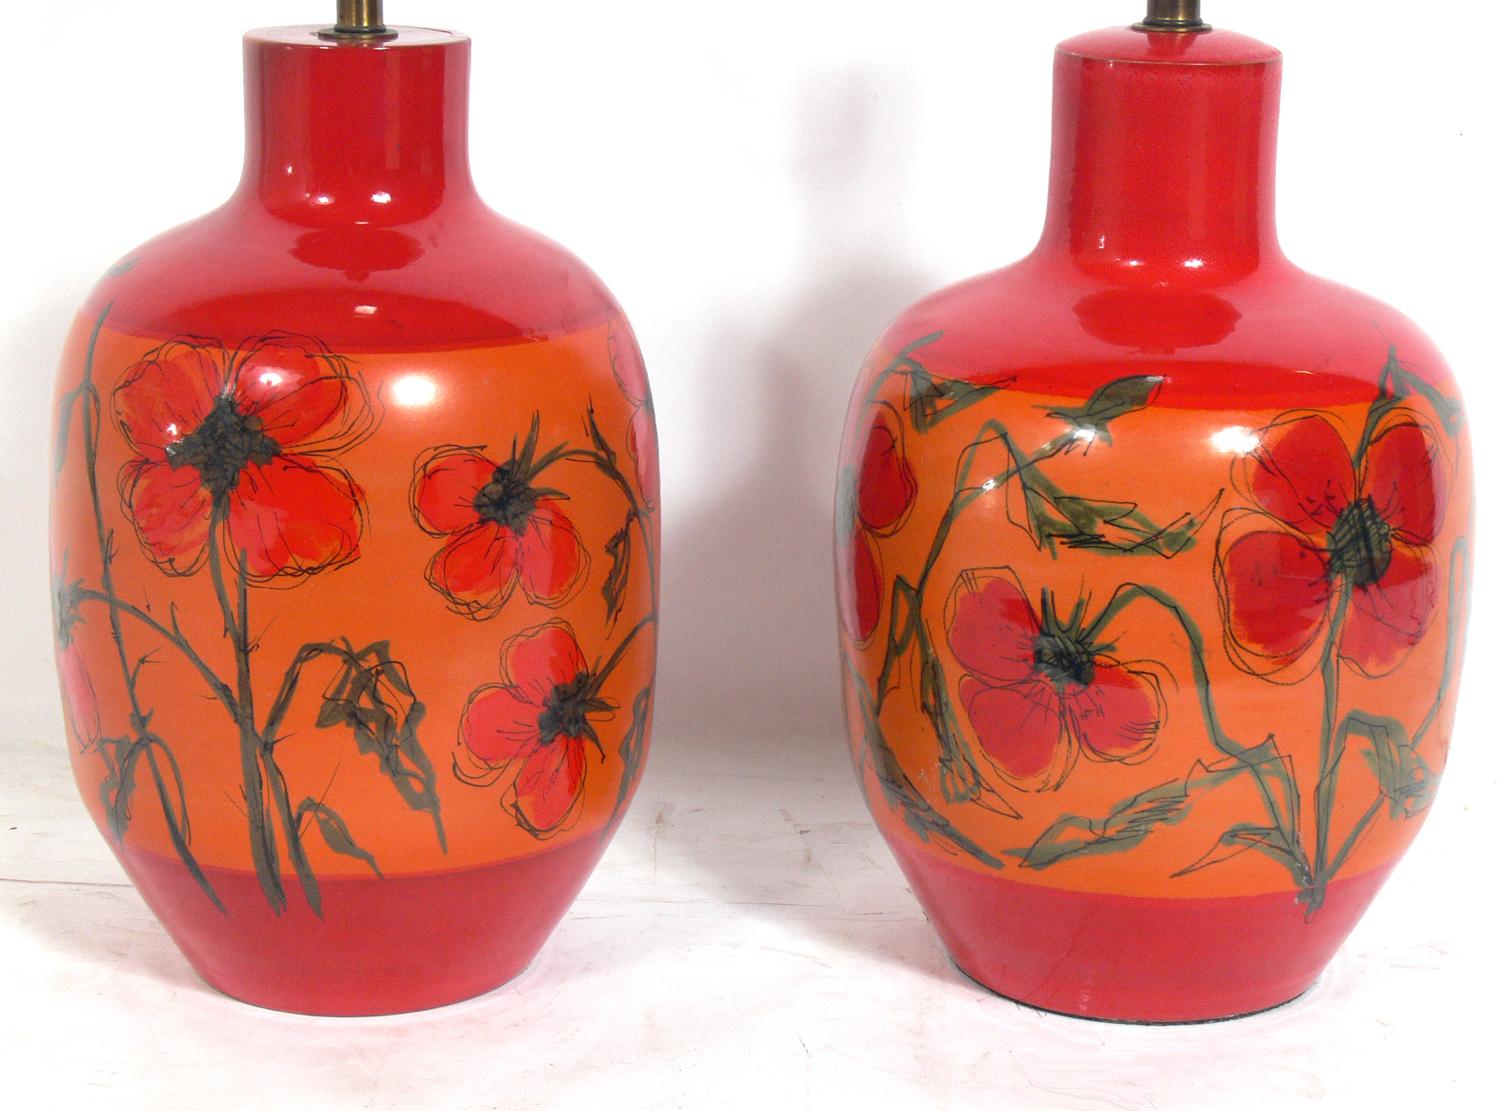 Colorful Italian ceramic lamps, made in Italy and imported to the US for Raymor, circa 1960s. Vibrant orange and red colors with wonderful hand painted details. They are a near pair, and have subtle differences as they are handmade. The differences